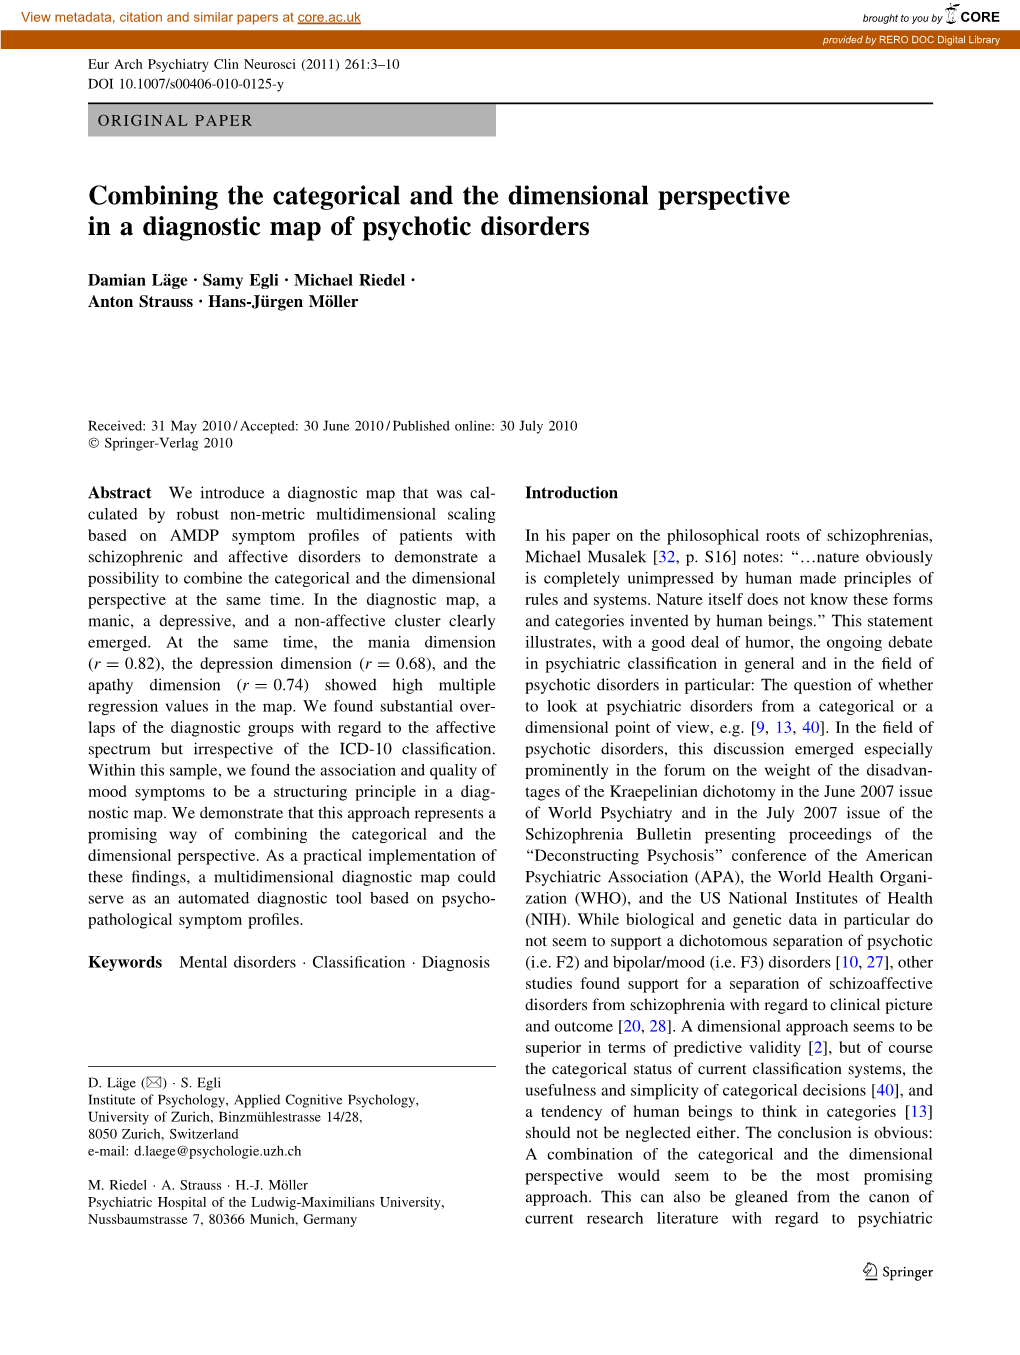 Combining the Categorical and the Dimensional Perspective in a Diagnostic Map of Psychotic Disorders